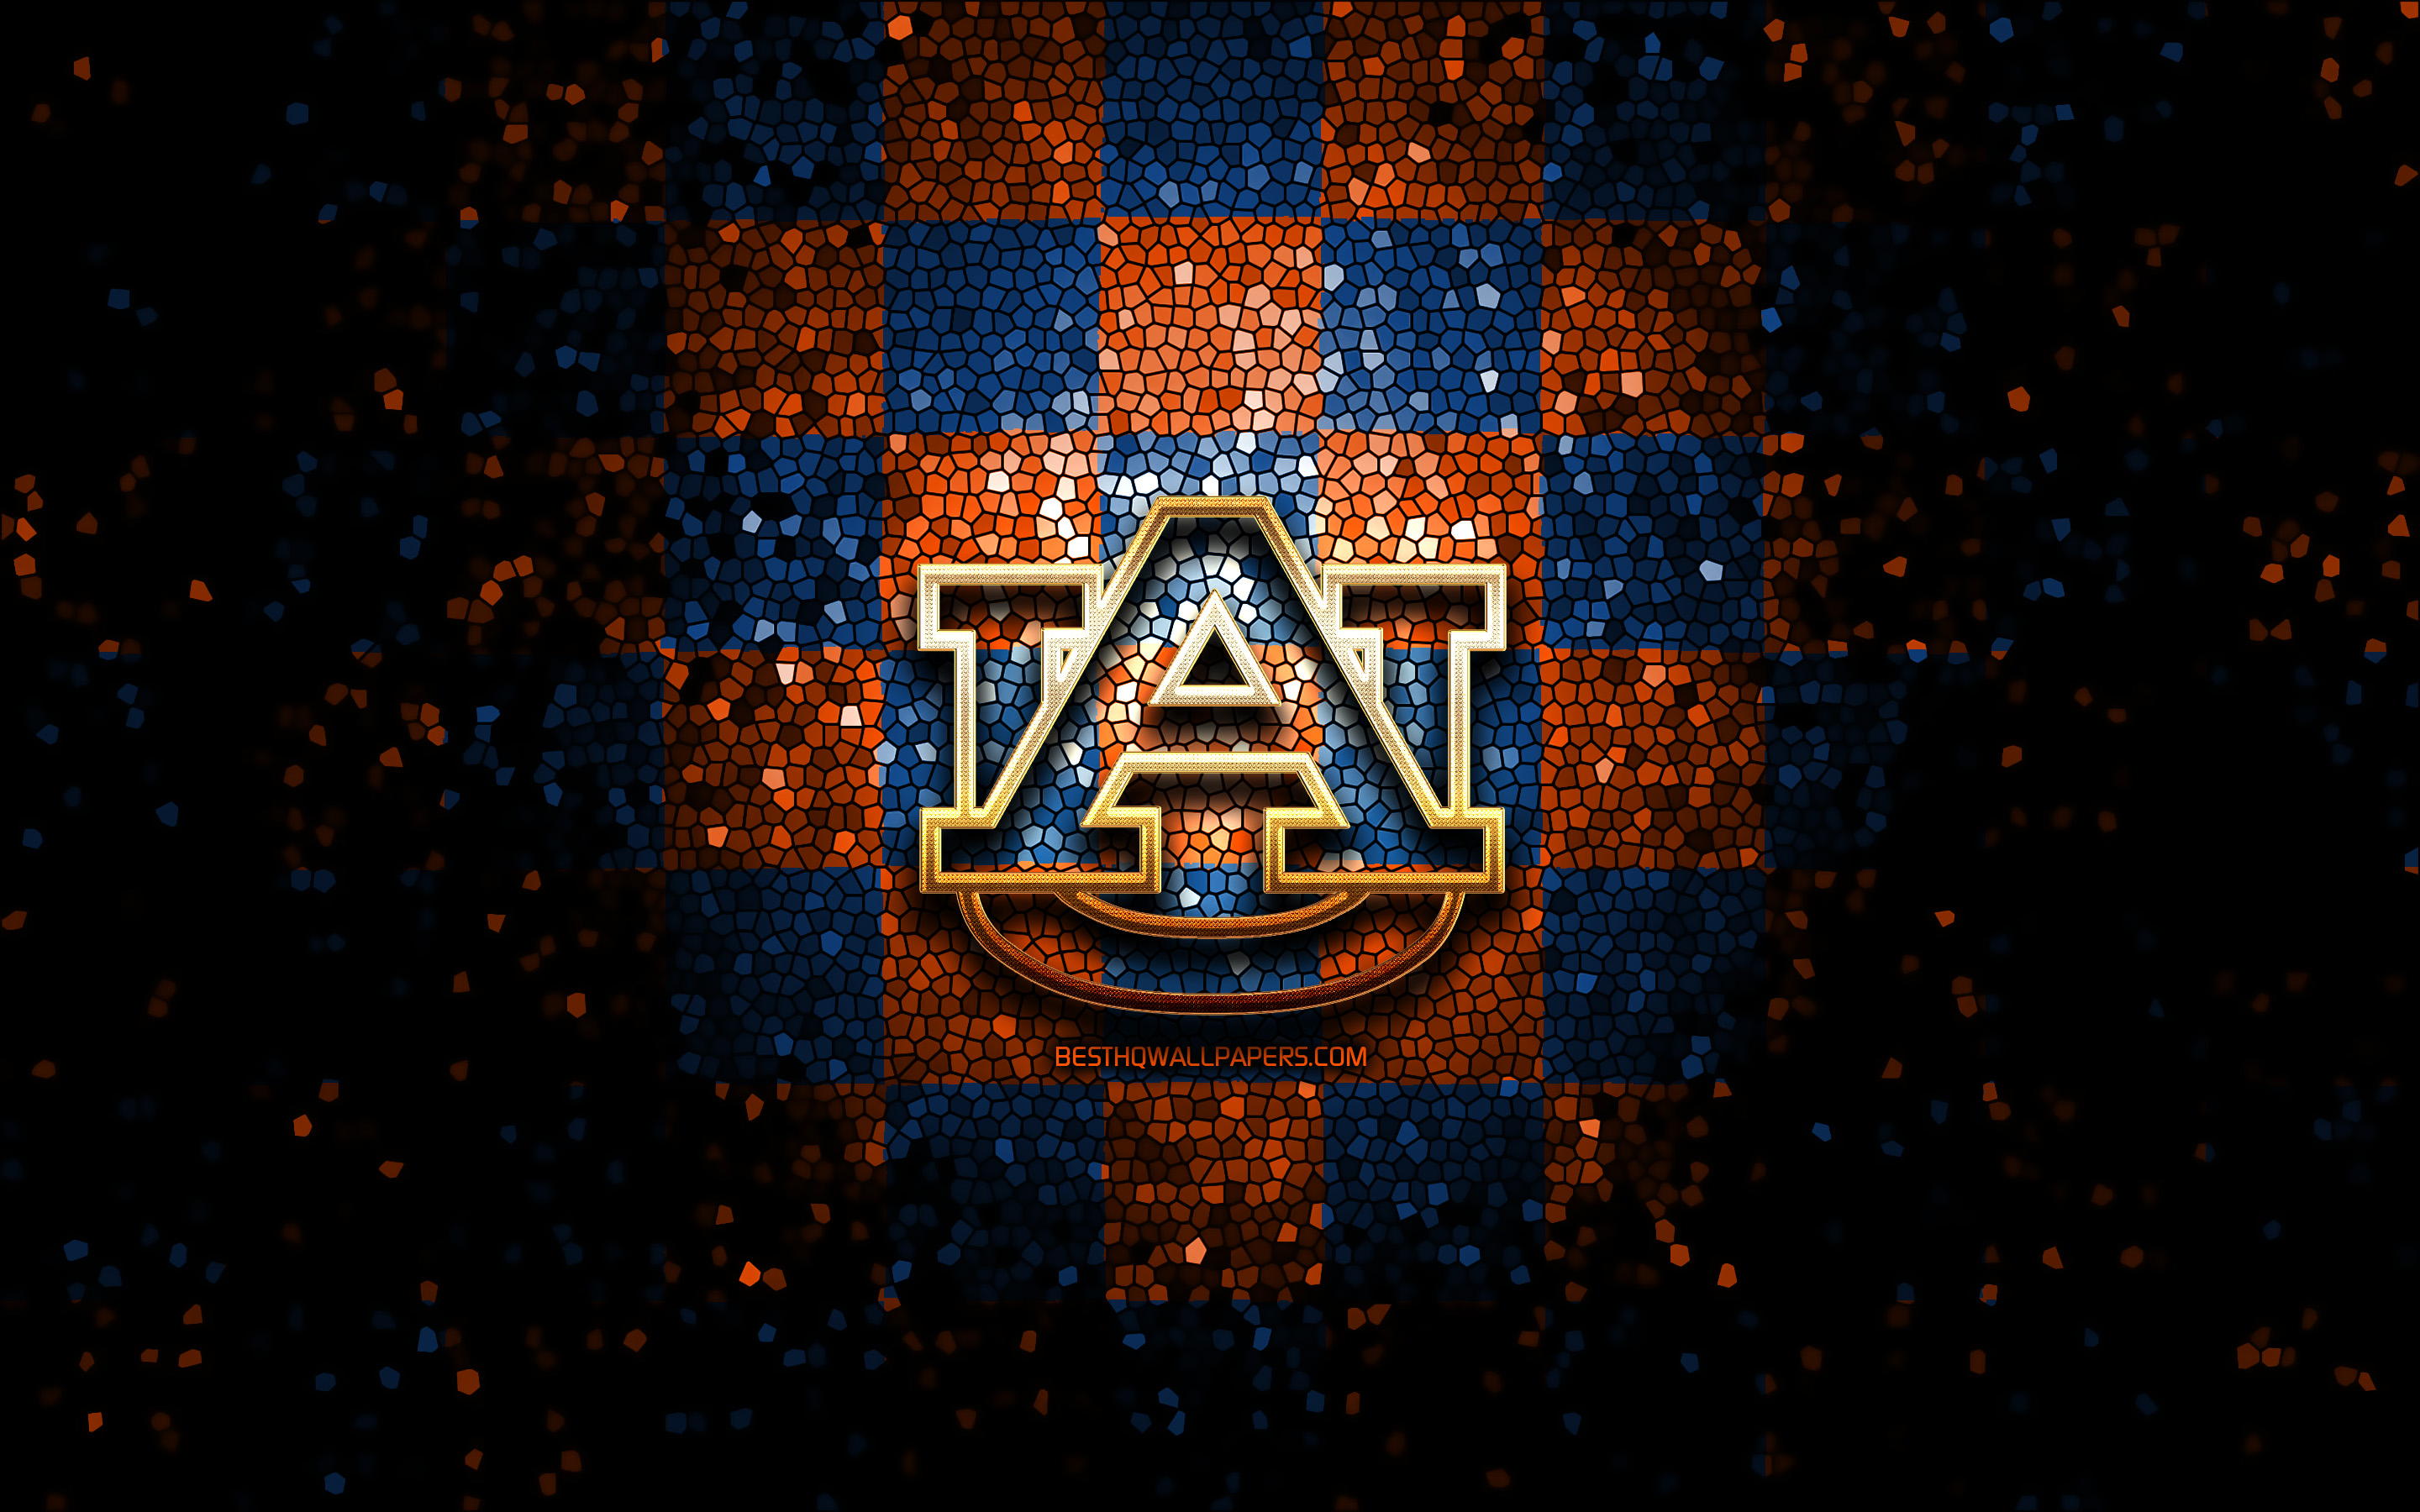 Auburn Tigers on 247Sports  Wallpaper Wednesday is back  Save the  latest wallpaper and carry Auburn Football with you everywhere  Facebook